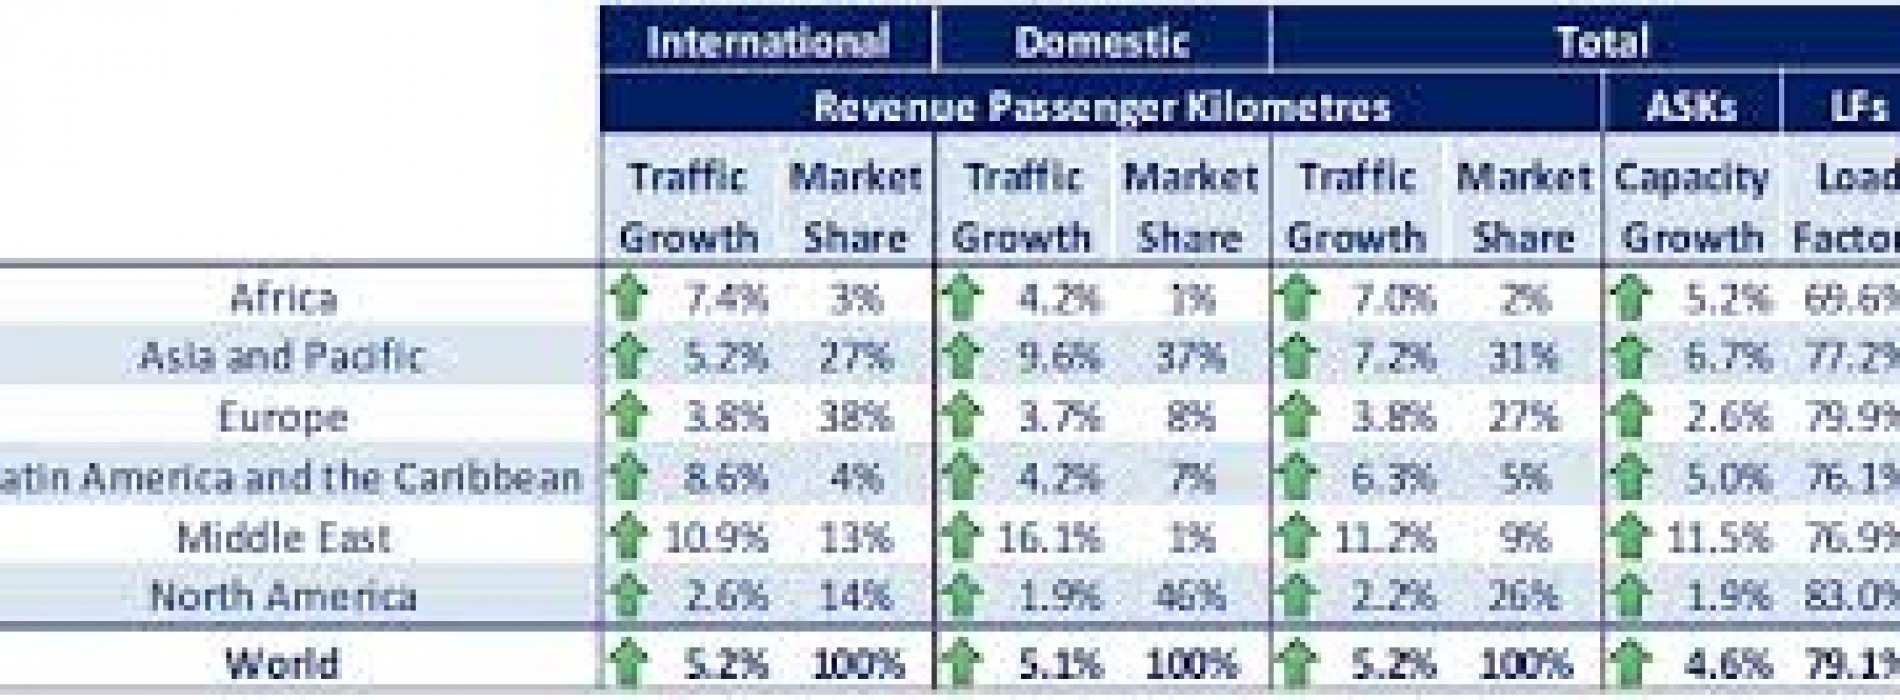 Air passenger demand sees robust growth rates in 2013